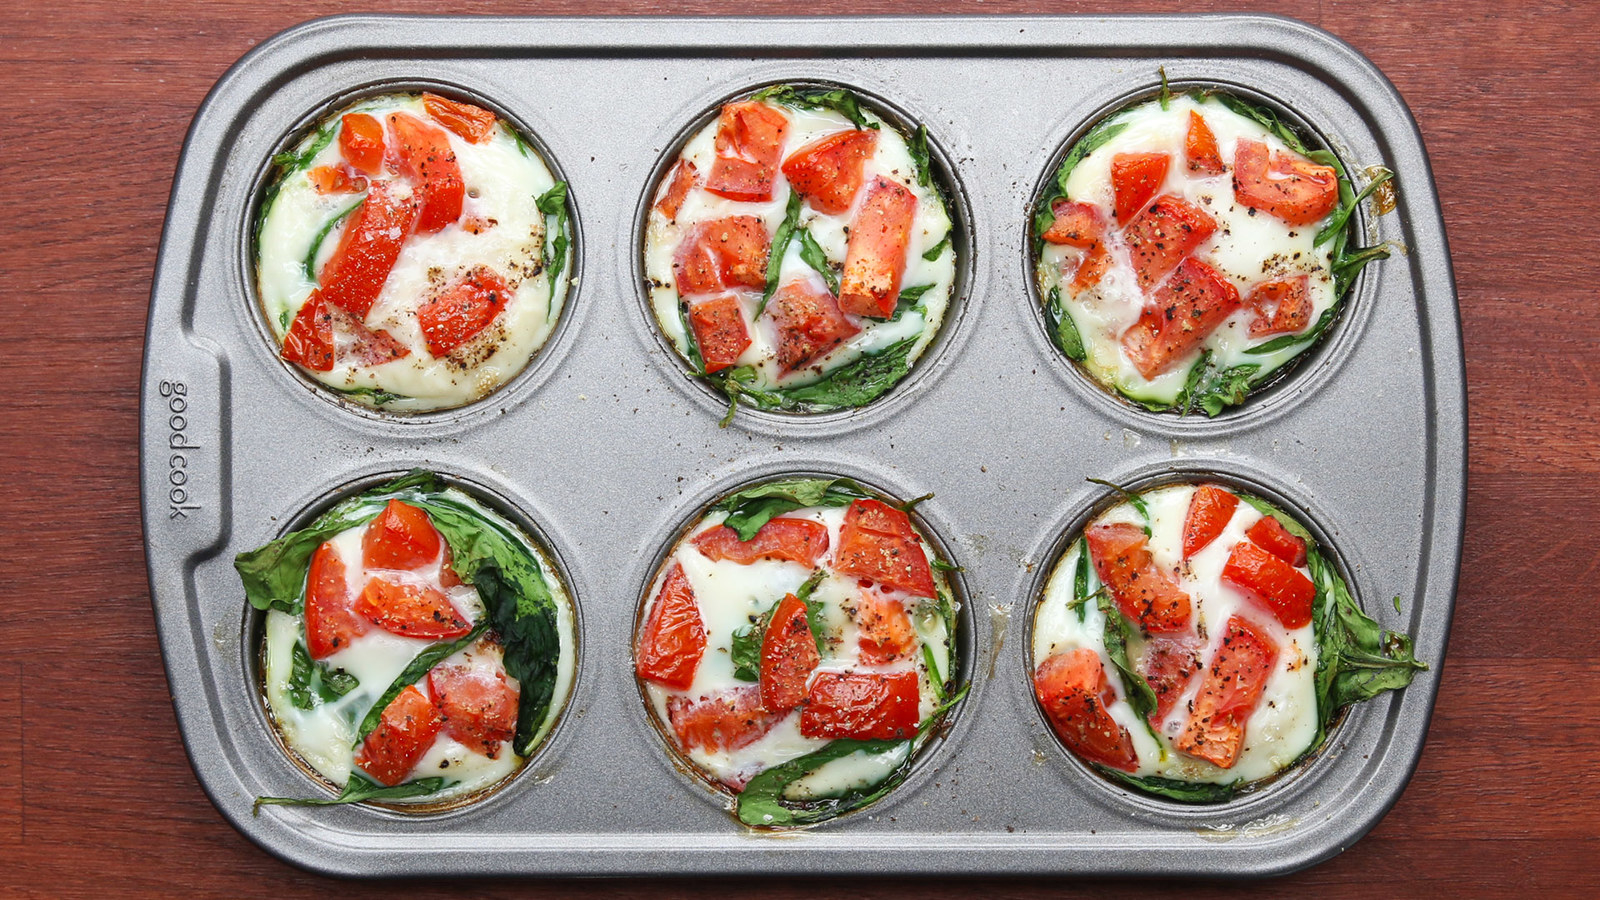 10 Ways To Low-Calorie Meal Prep For Your Day